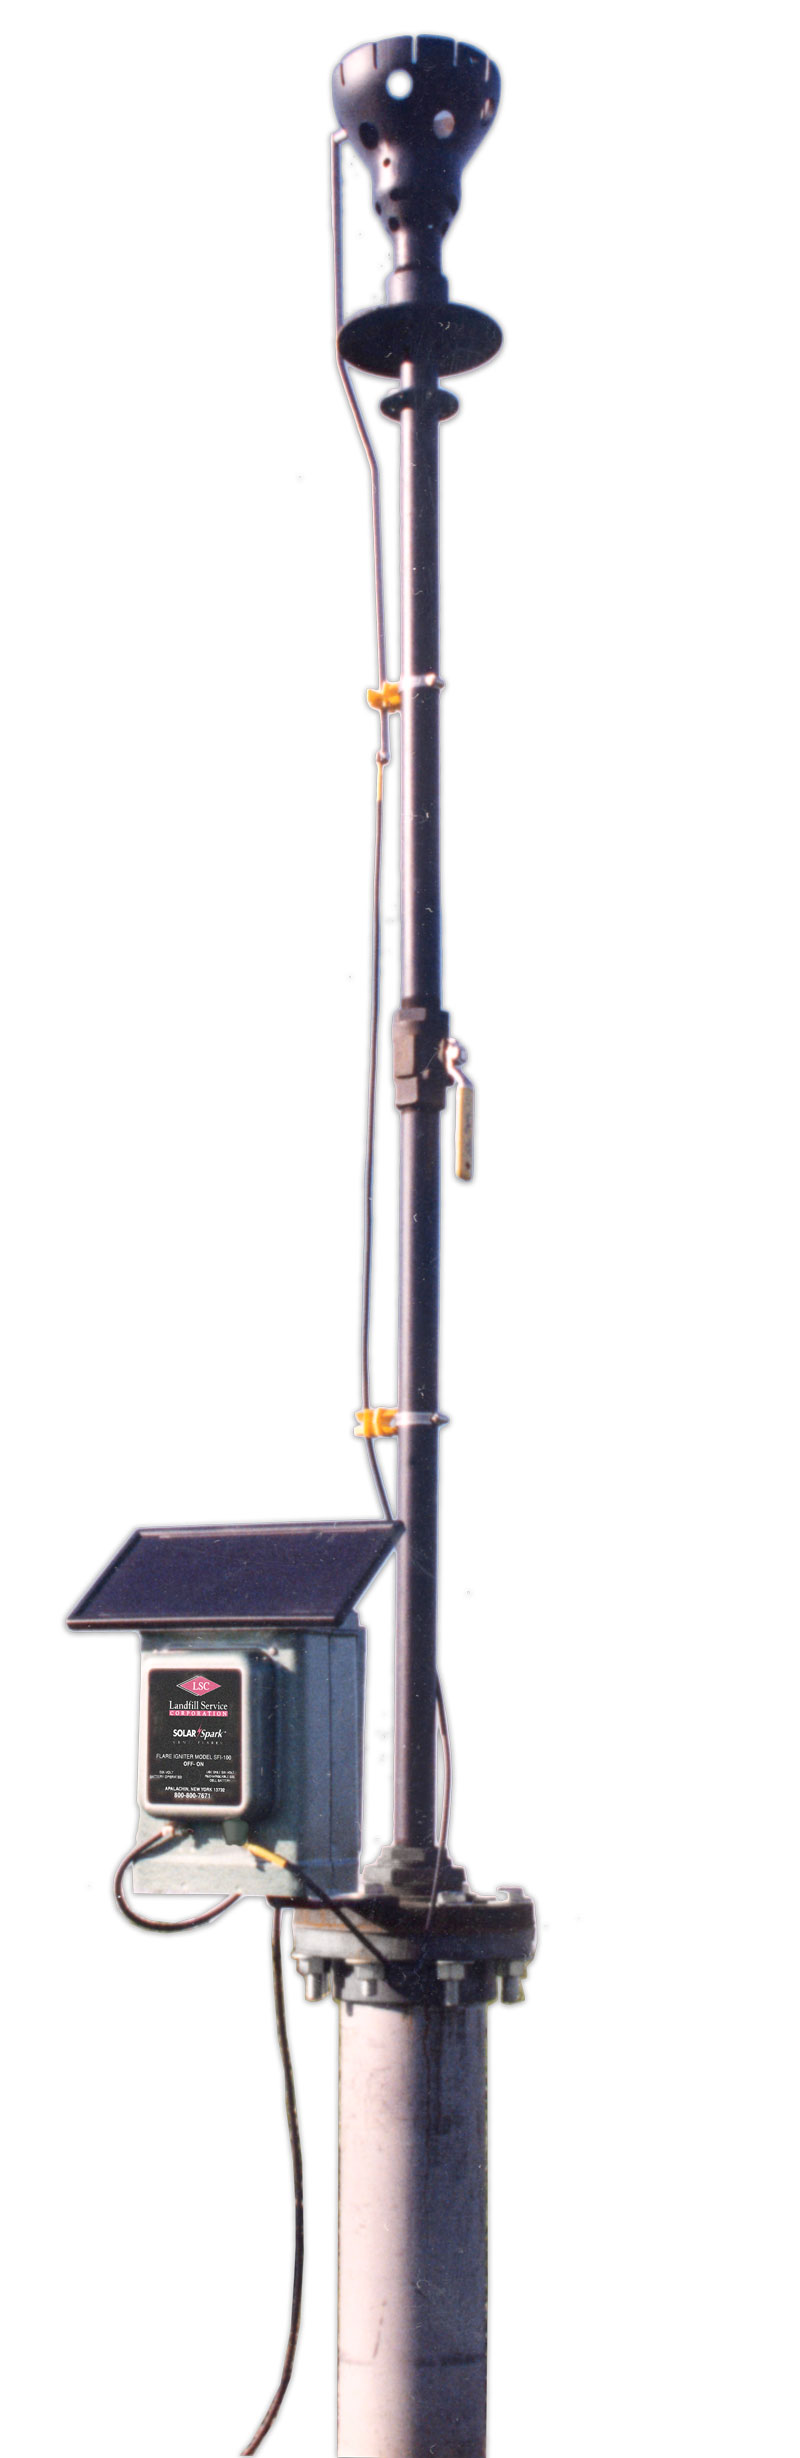 Candlestick Style Landfill Gas Flare